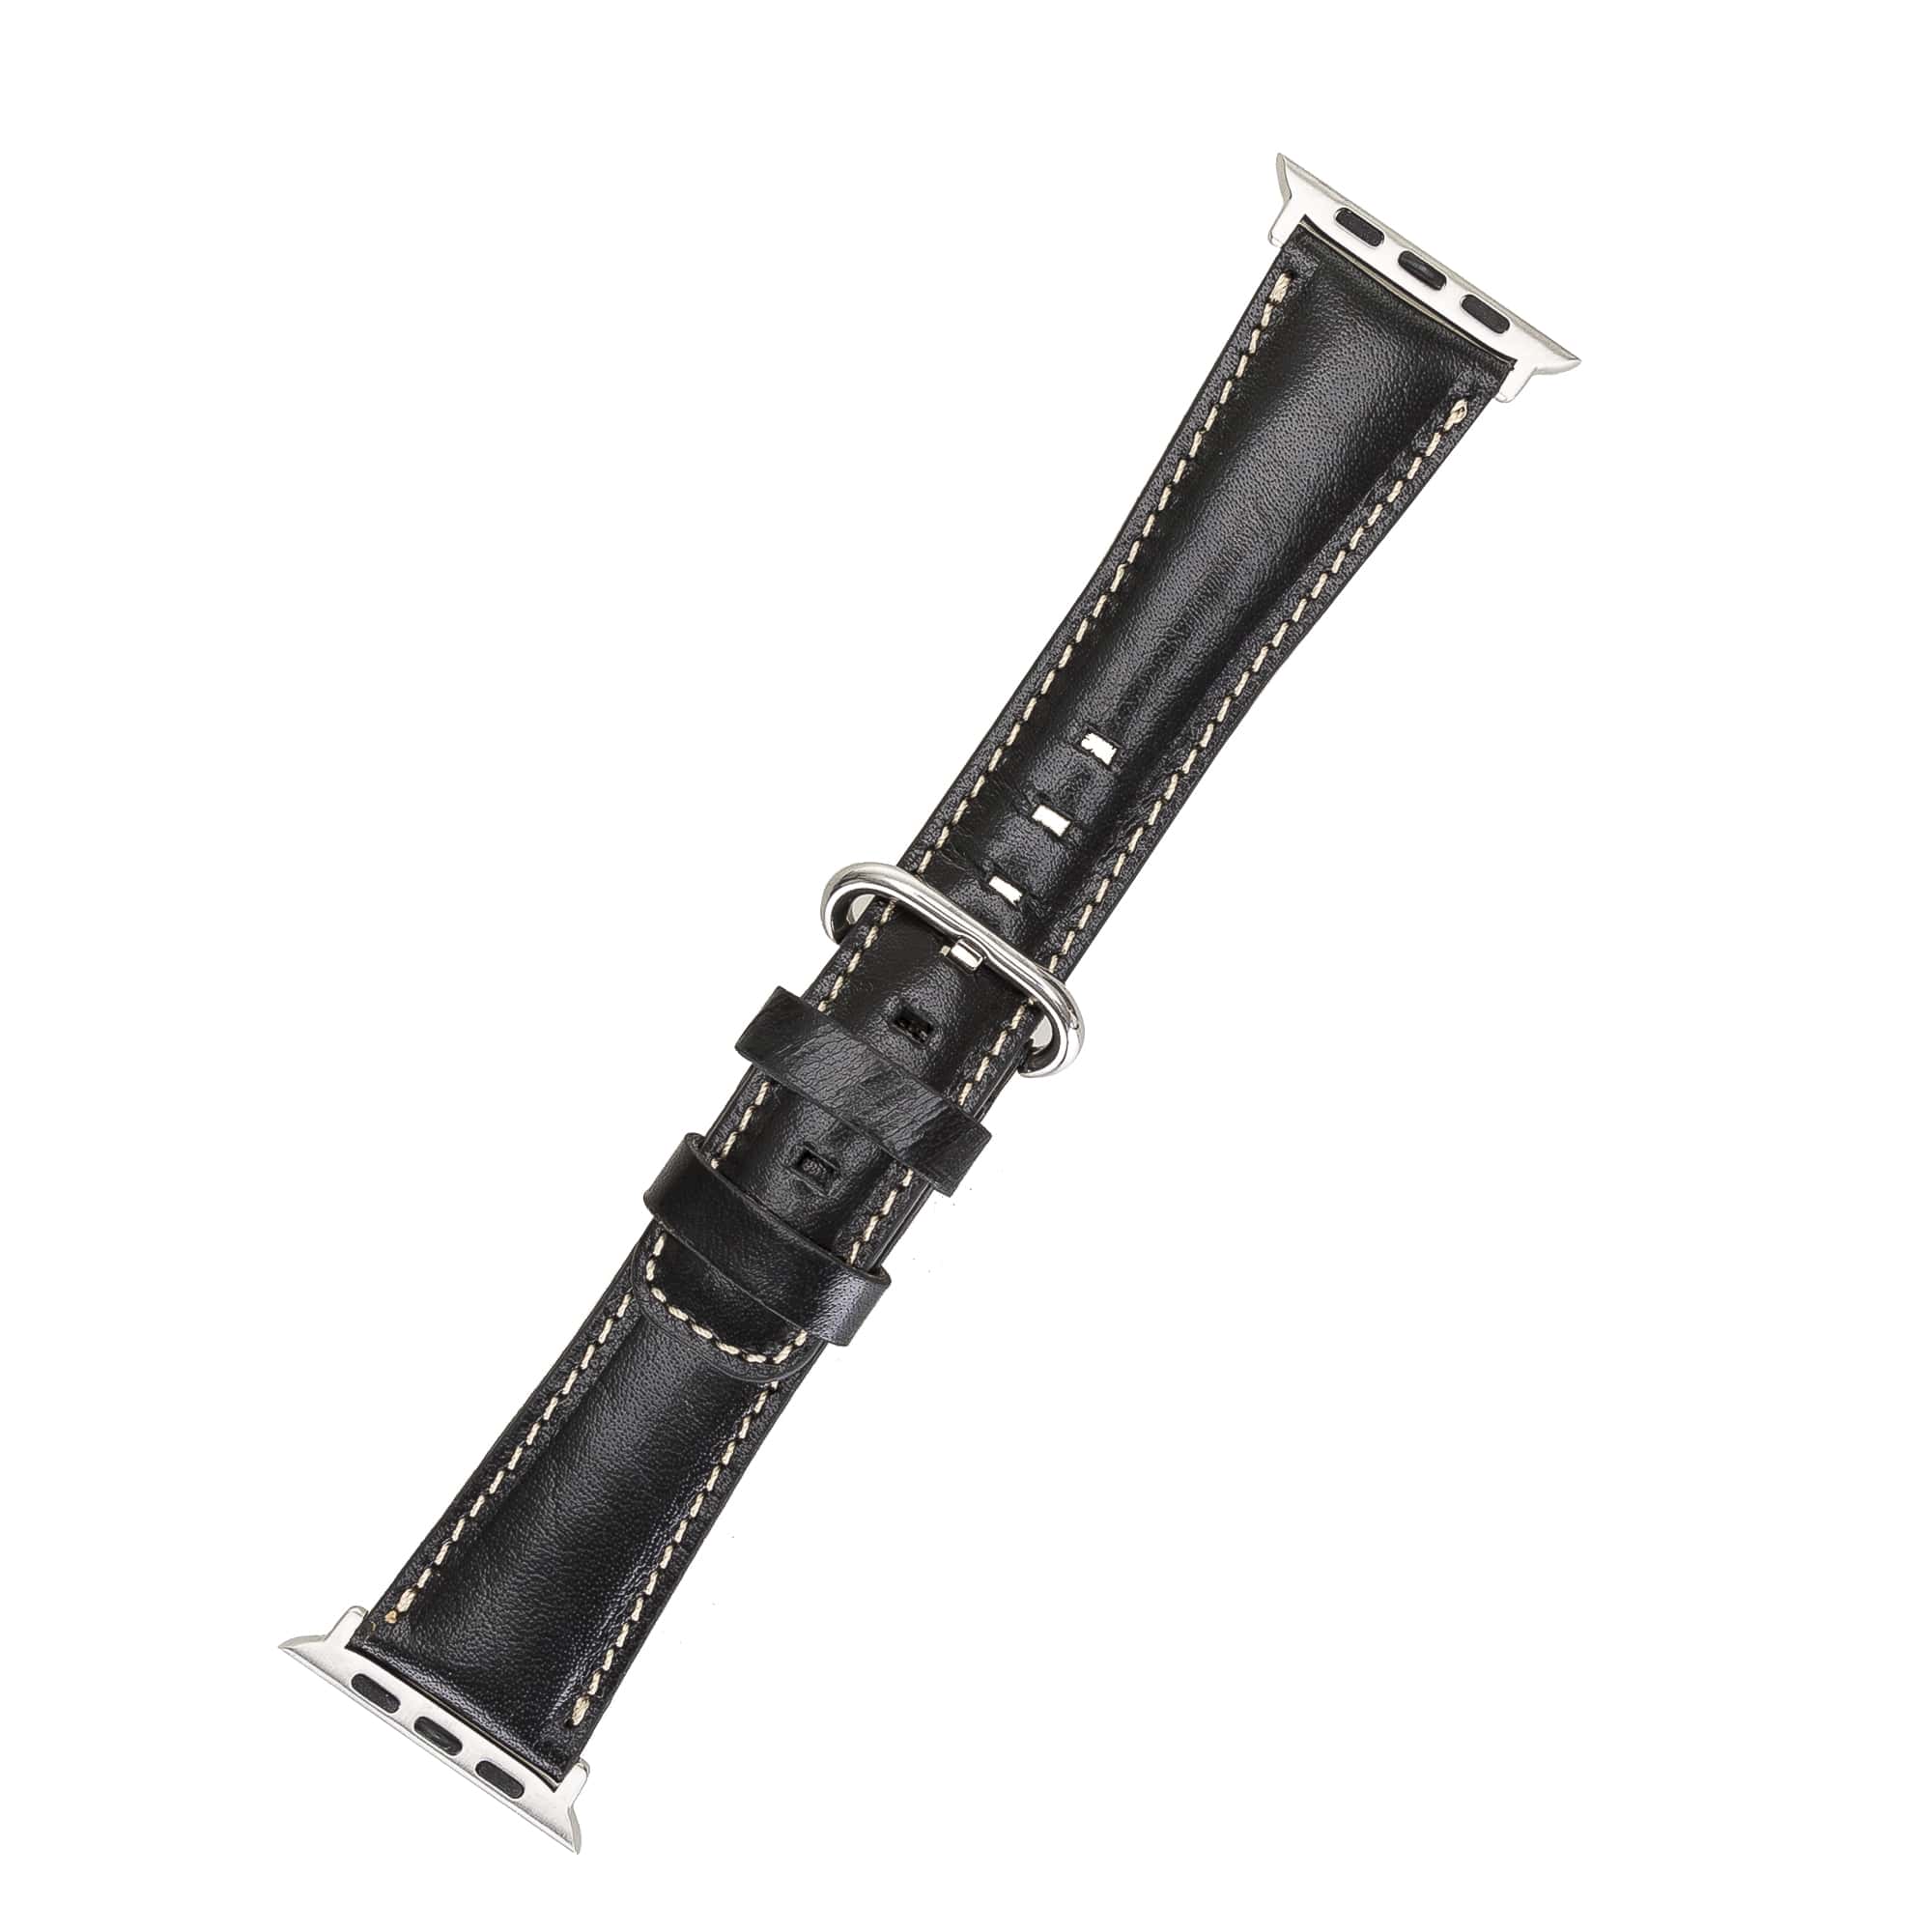 Oxford Black Genuine Leather Apple Watch Band Strap 38mm 40mm 42mm 44mm 45mm for All Series - Bomonti - 4